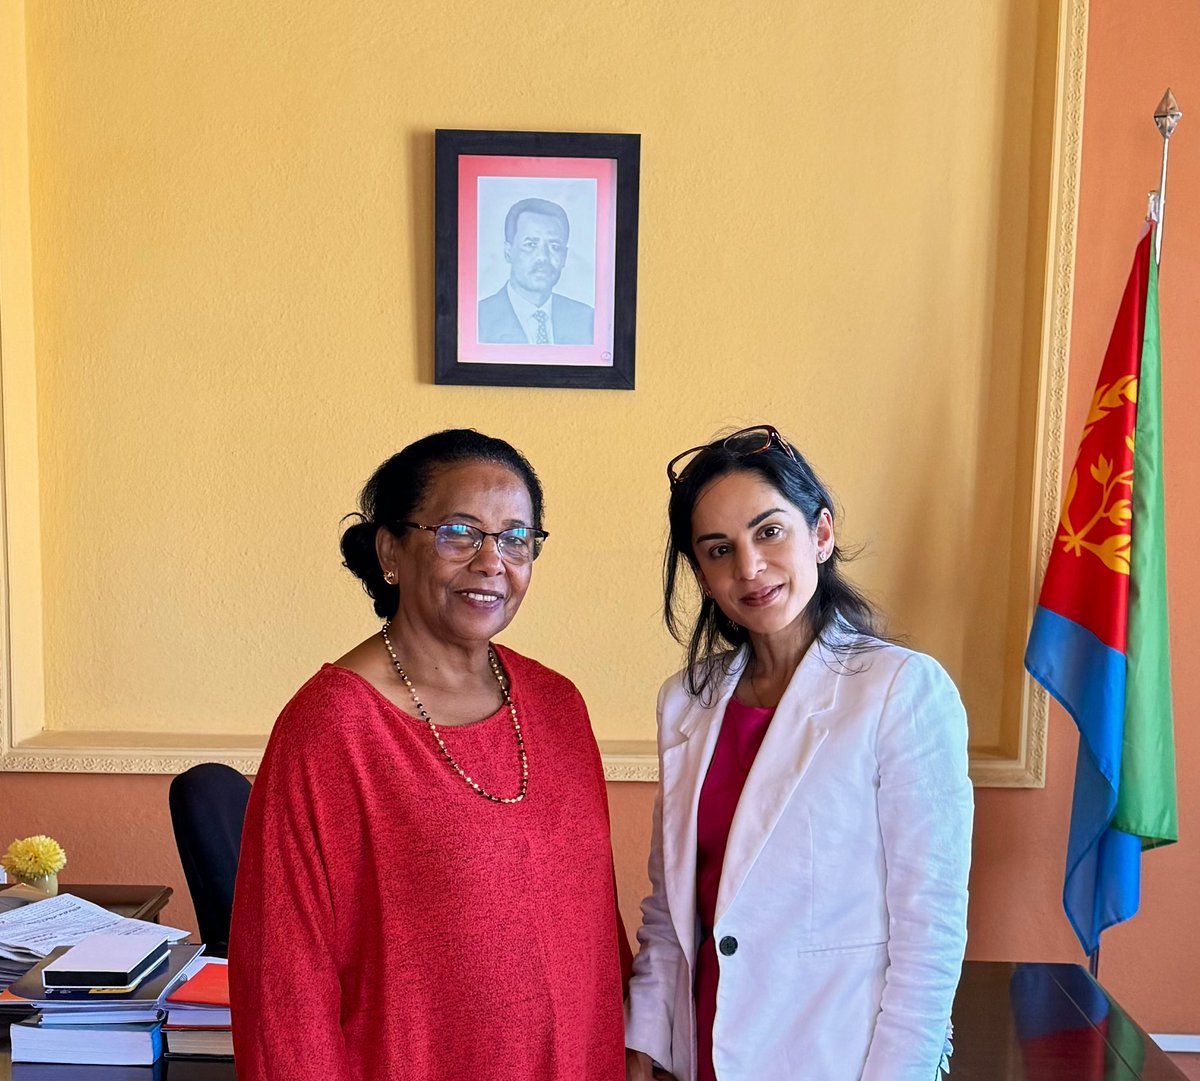 Grateful to Minister Fozia Hashim, Minister of Justice, for the warm welcome and first meeting last week. Discussed the long-standing partnership with the @UNinEritrea , particularly through @UNDPEritrea , and continued collaboration 🇺🇳🇪🇷